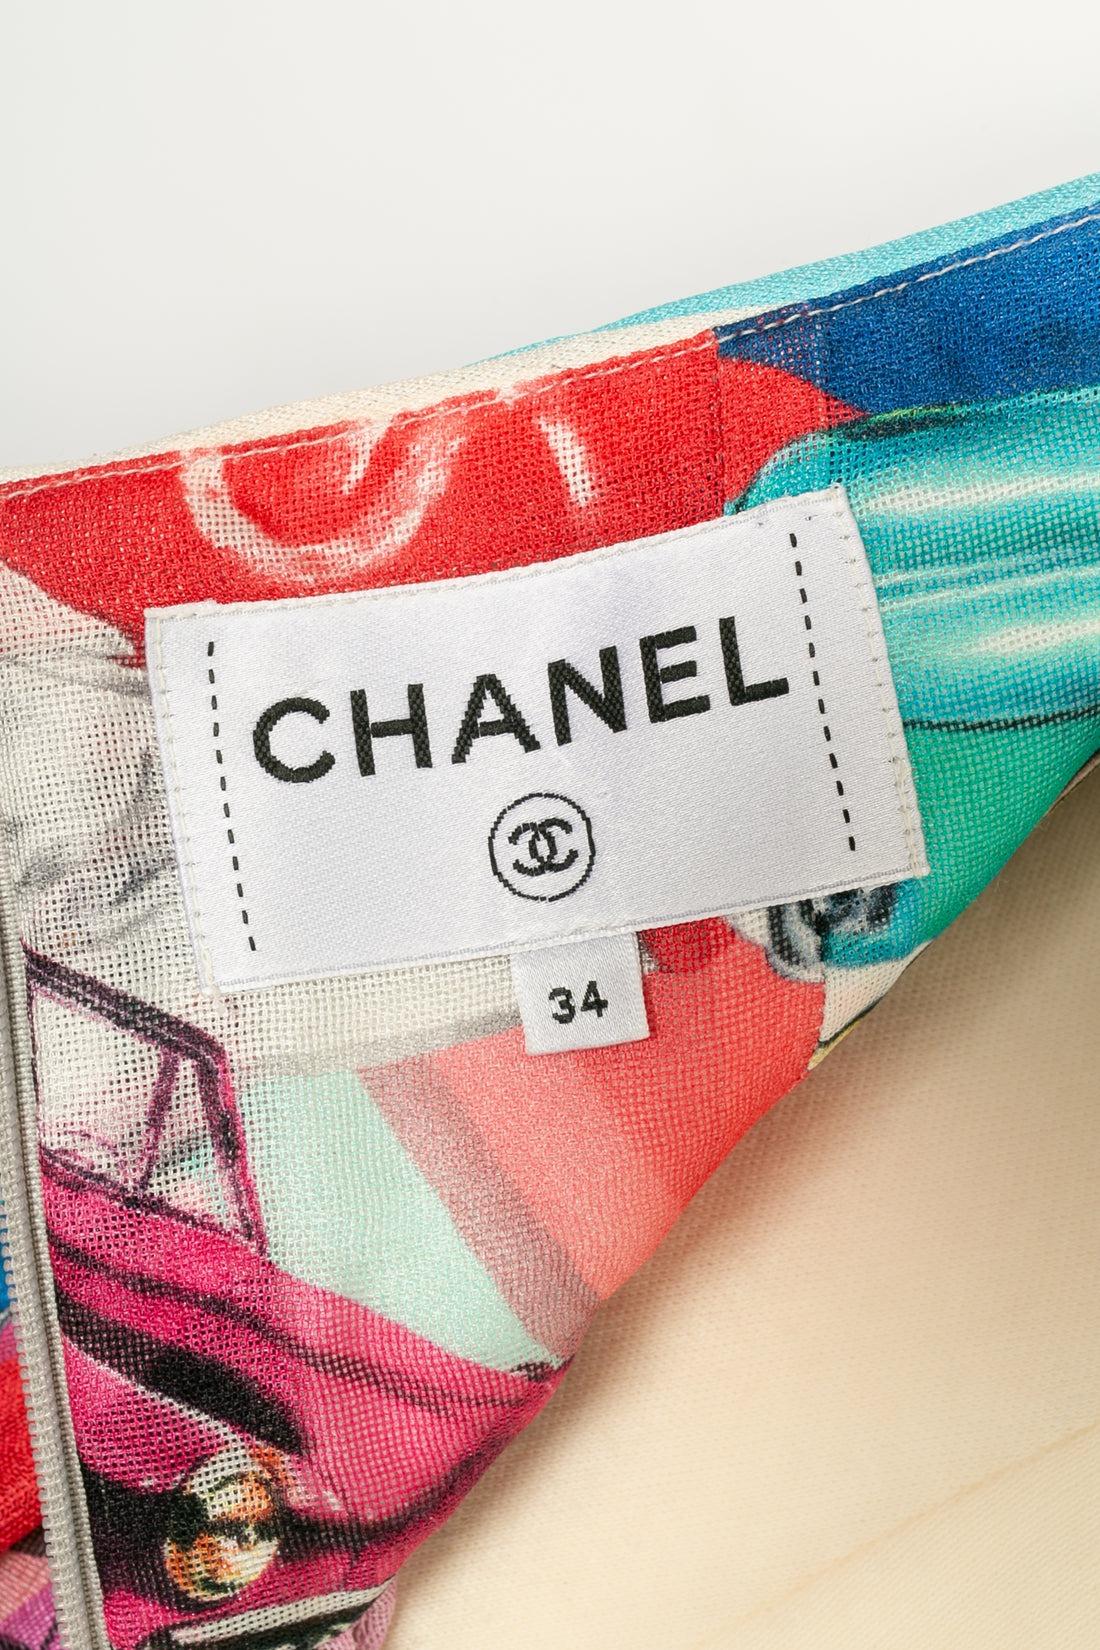 Chanel Long Silk Dress in Red, Blue and Green Tones, 2017 For Sale 4